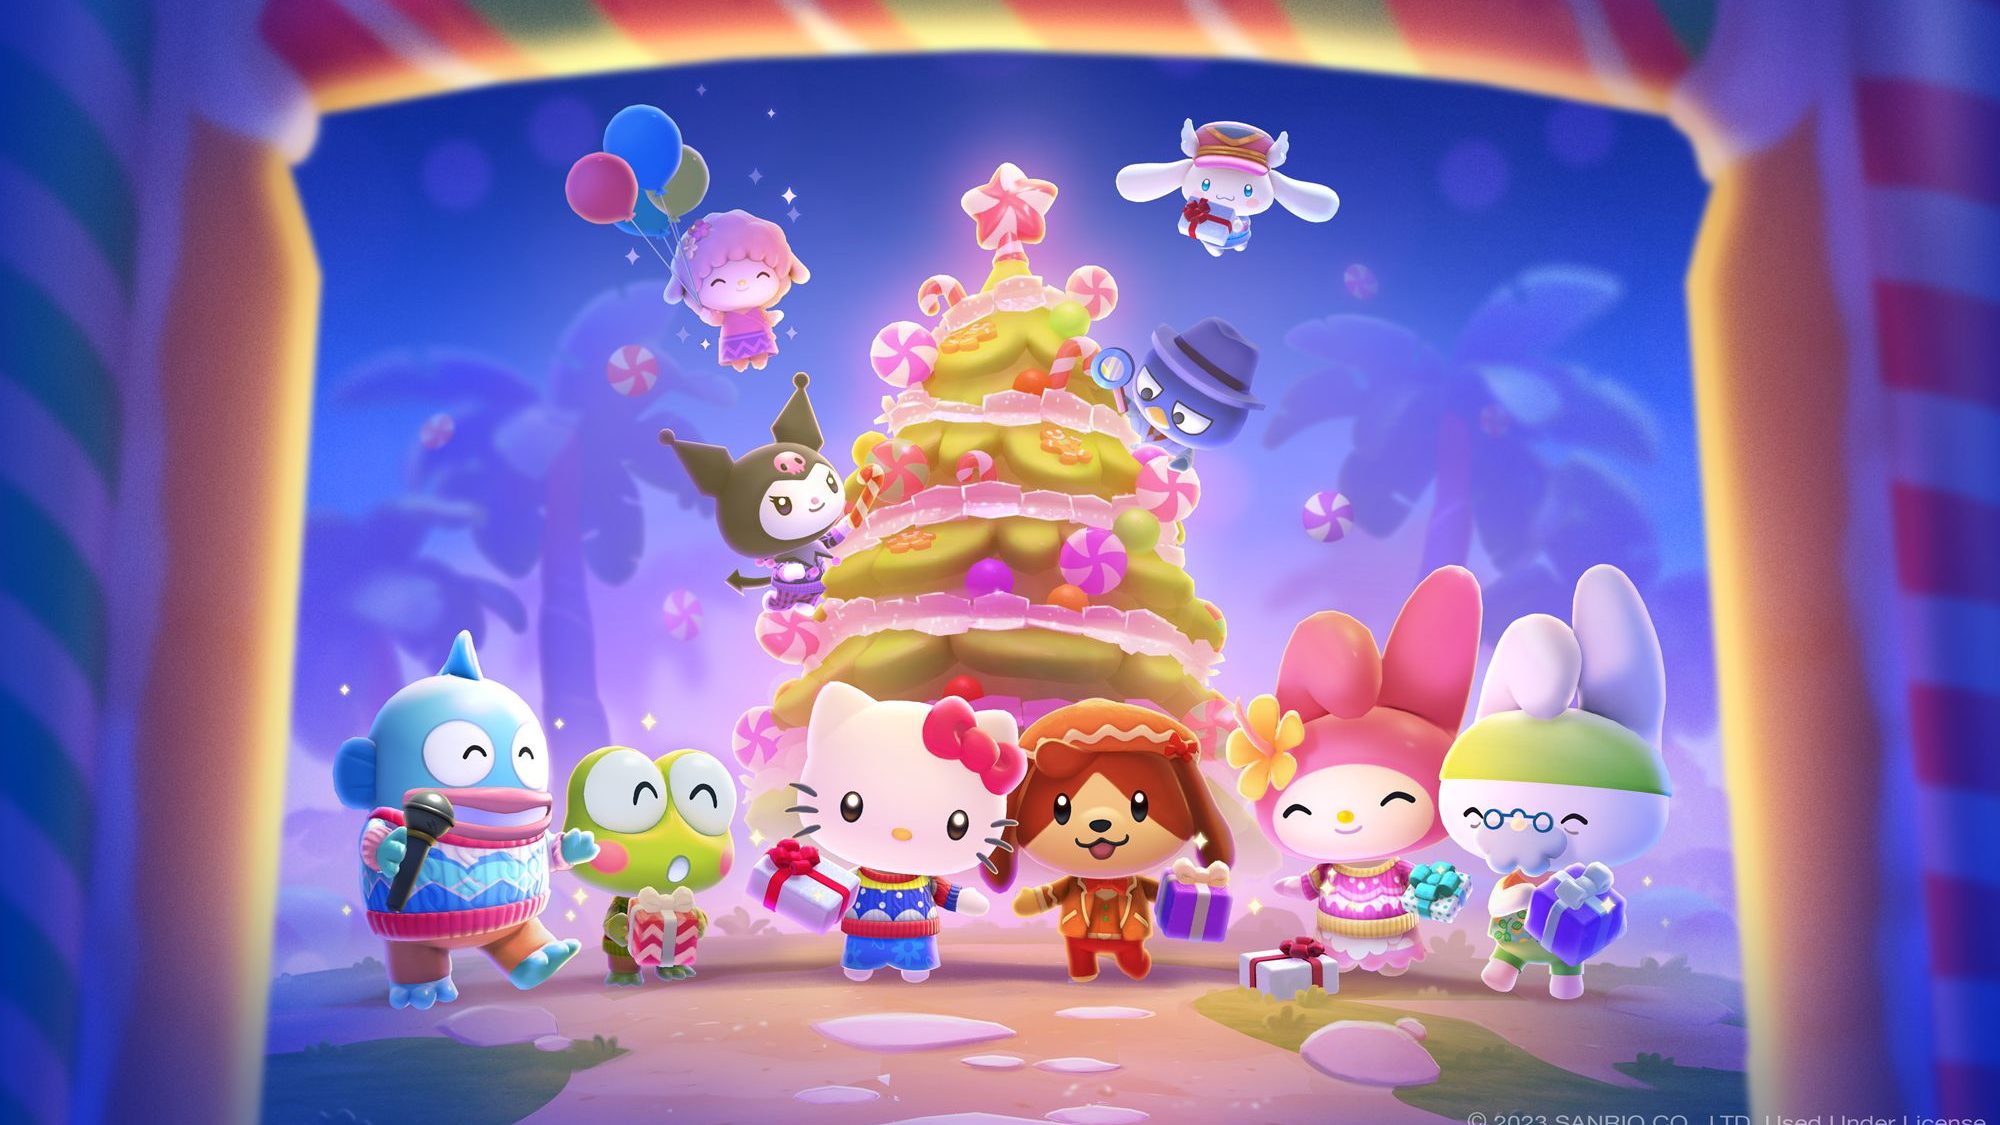 Hello Kitty Island Adventure is real but has nothing to do with